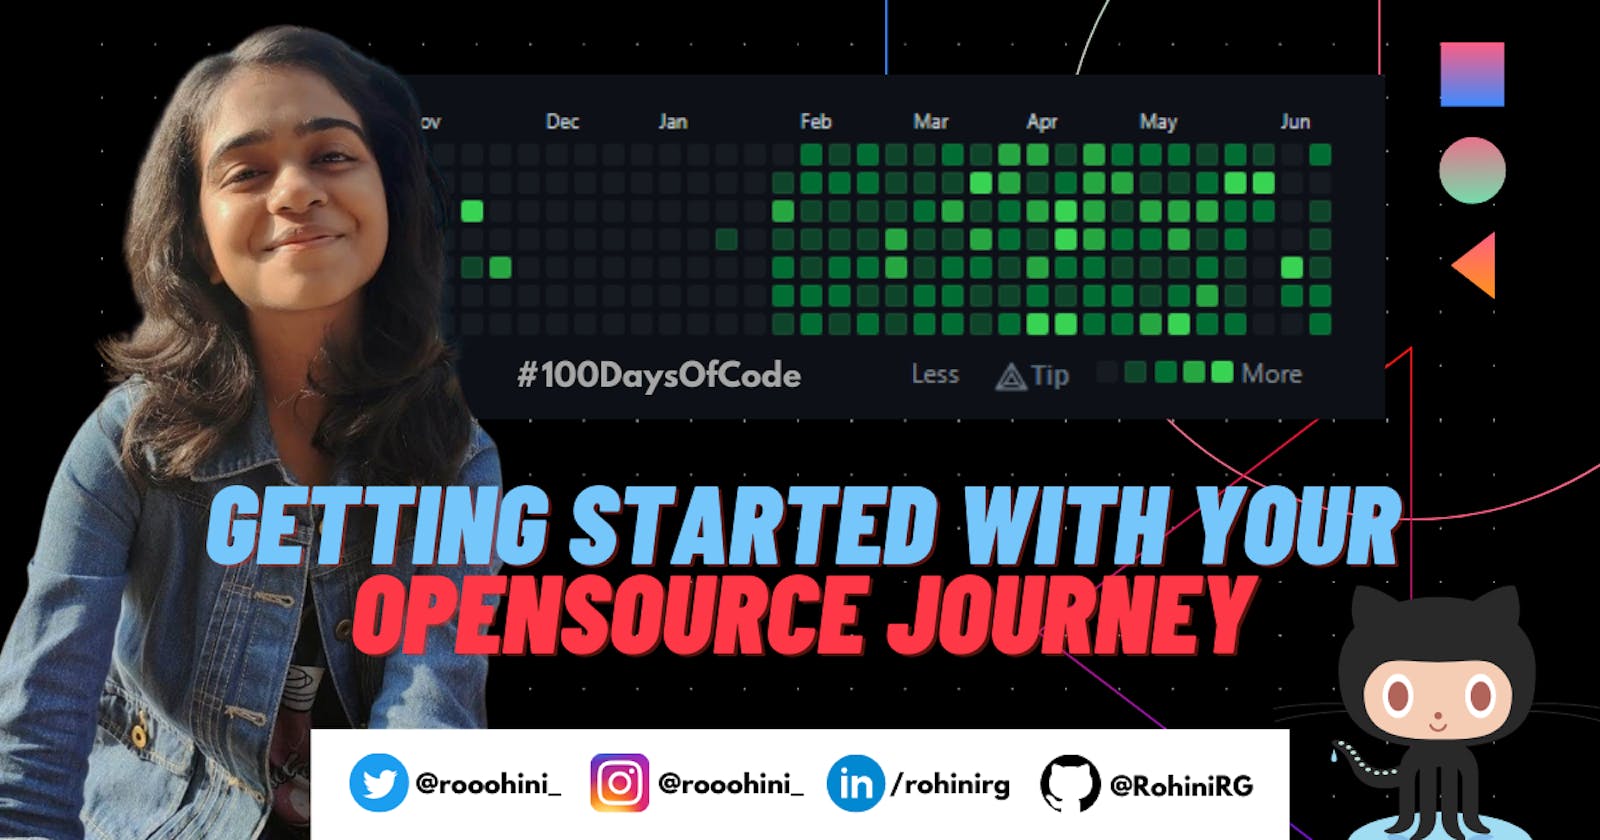 Getting started with your Open Source journey